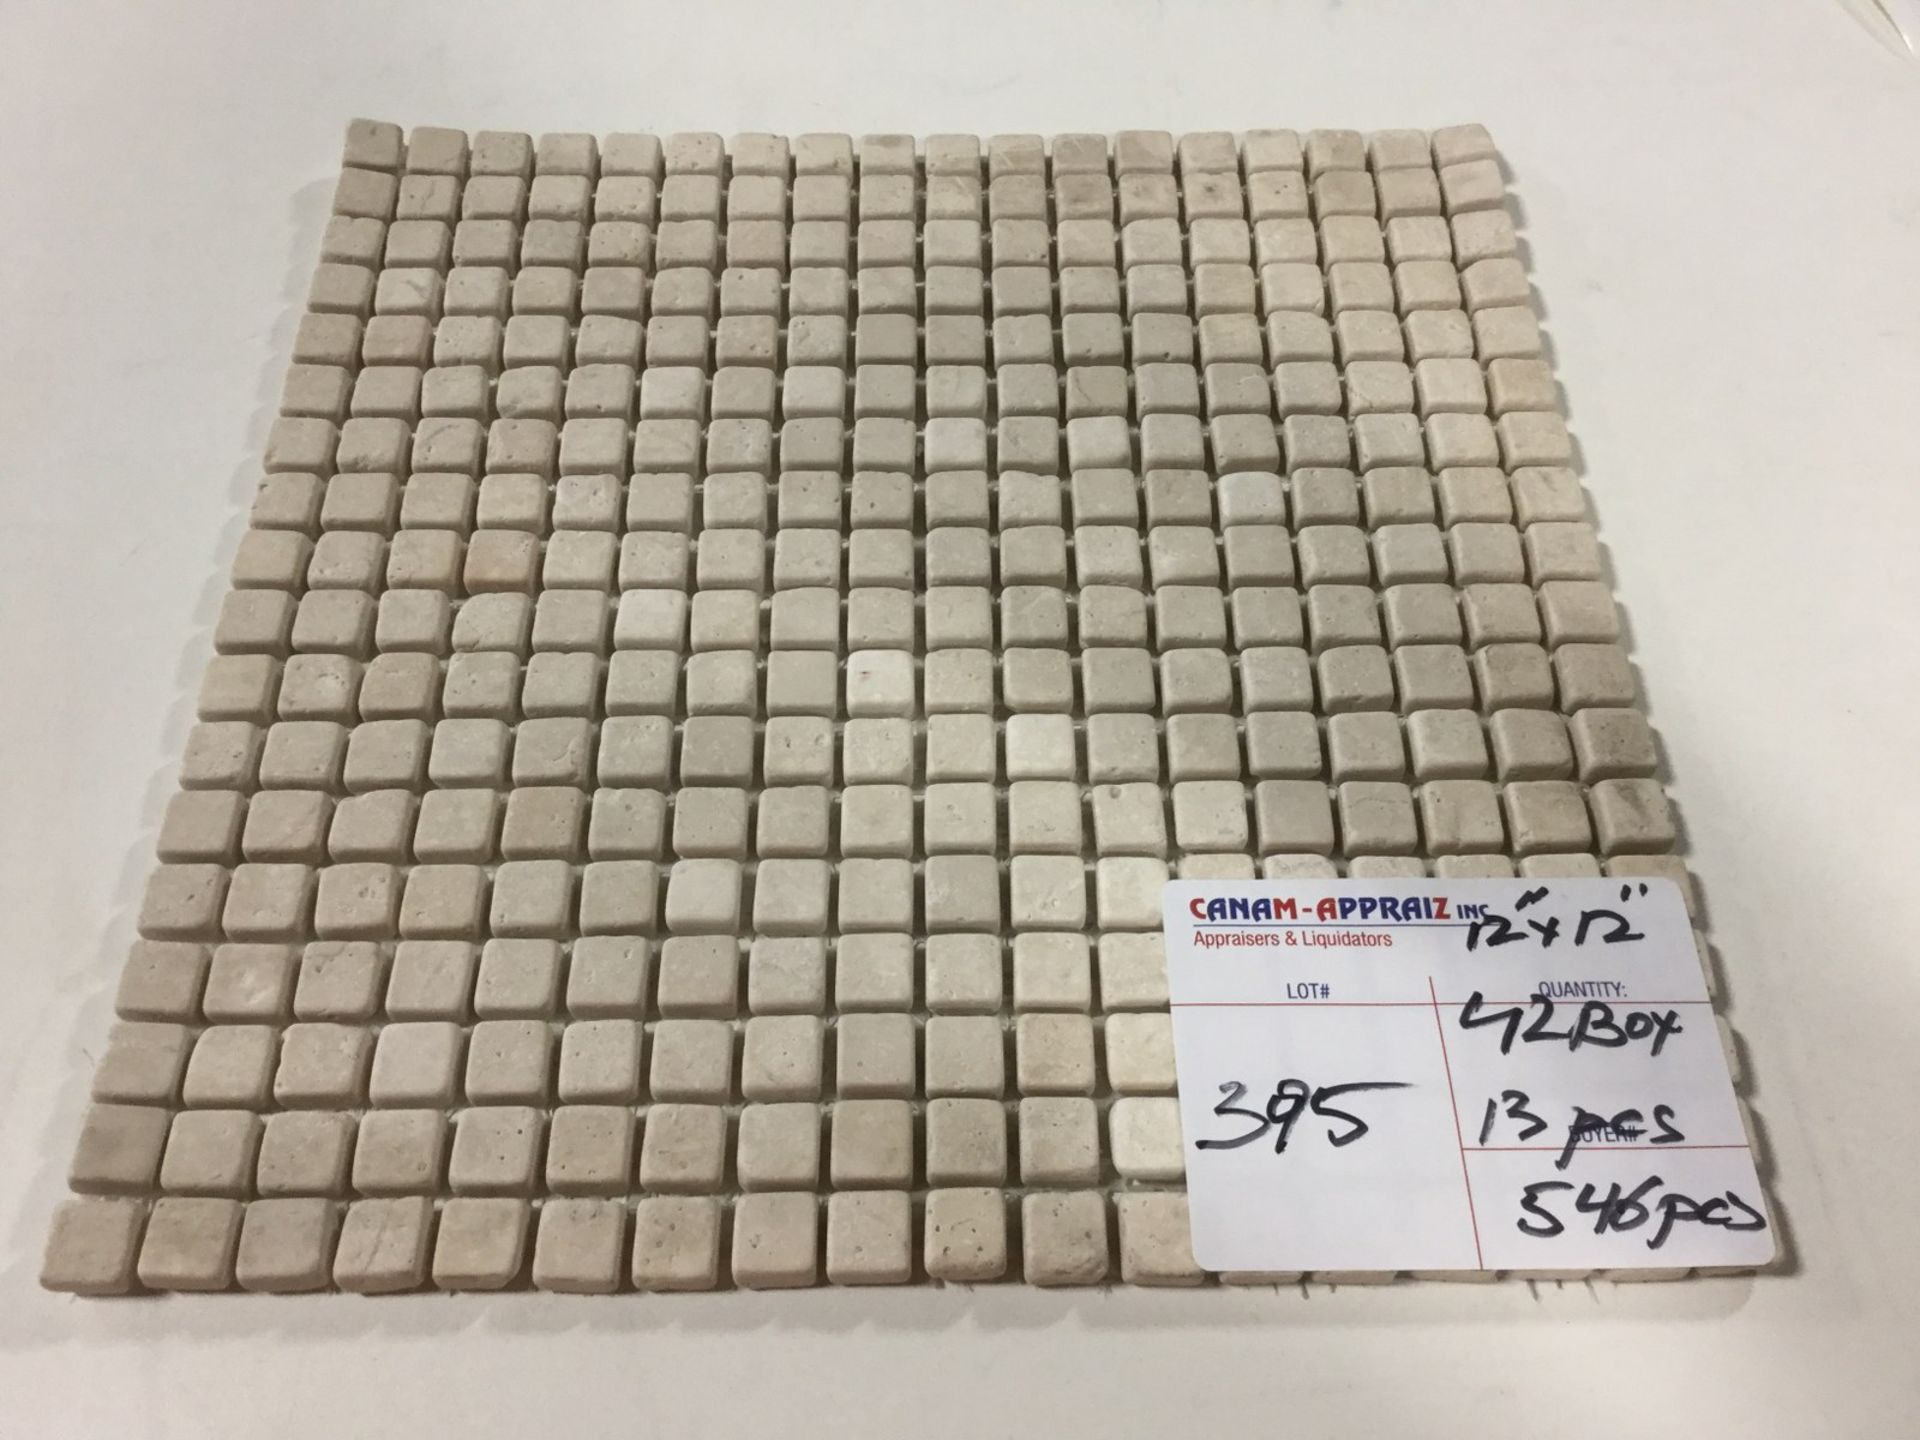 5/8"X5/8" EGYPTIAN BEIGE MARBLE HONED MOSAIC 546 PIECES OR SQ/FT, RETAIL $12.98 SQ/FT